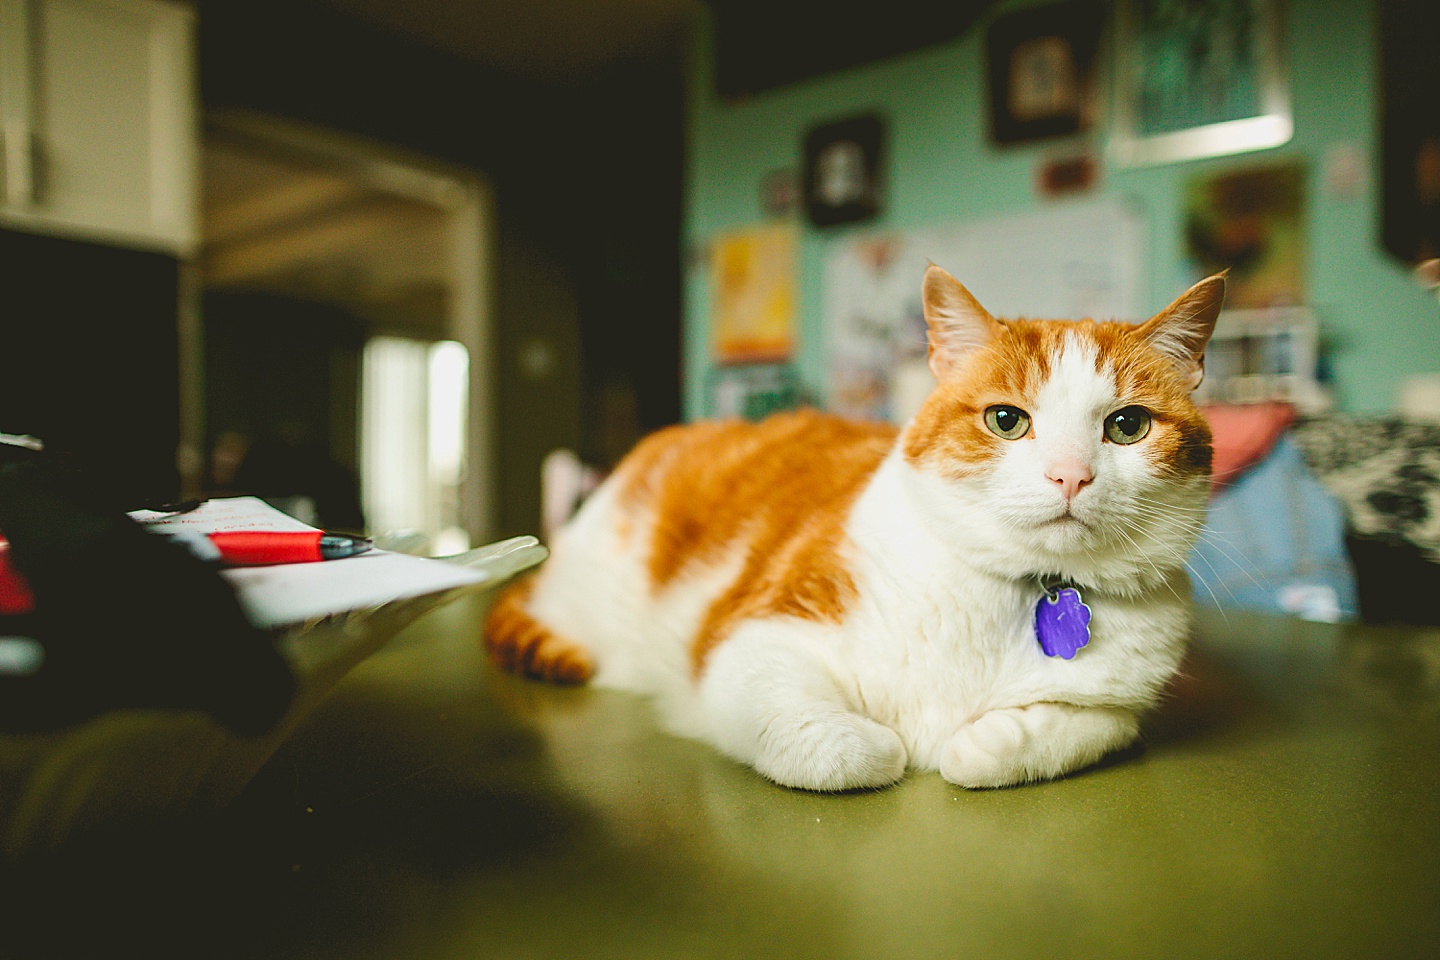 Orange and white tabby cat sitting on kitchen counter